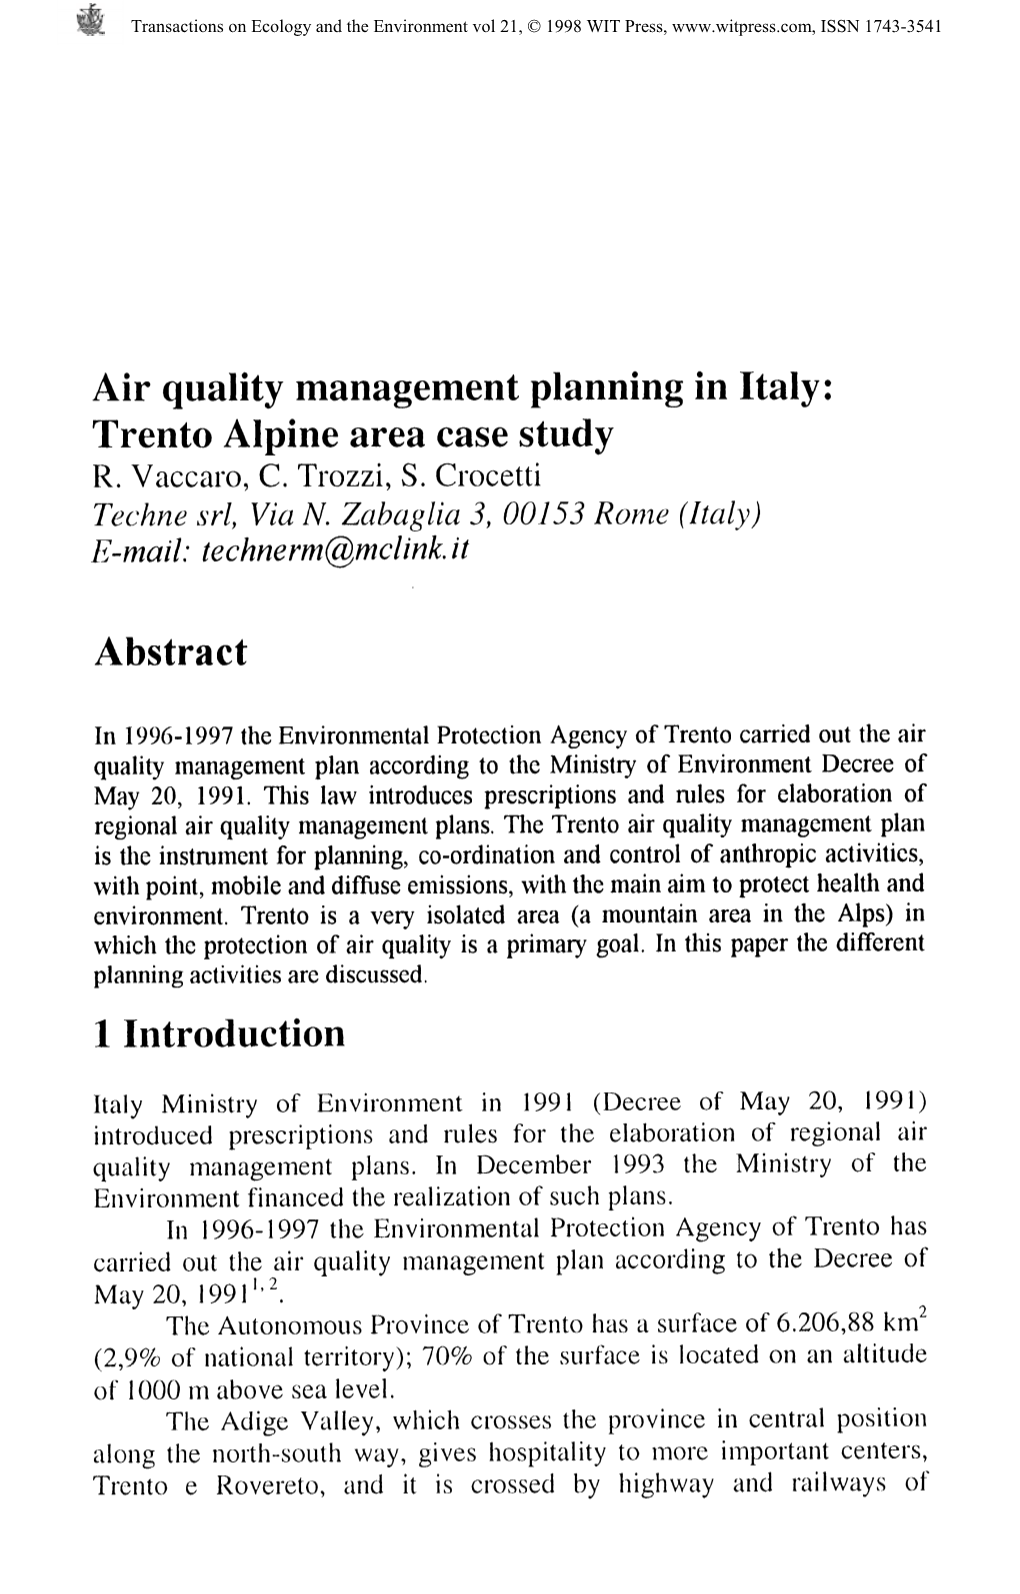 Air Quality Management Planning in Italy: Trento Alpine Area